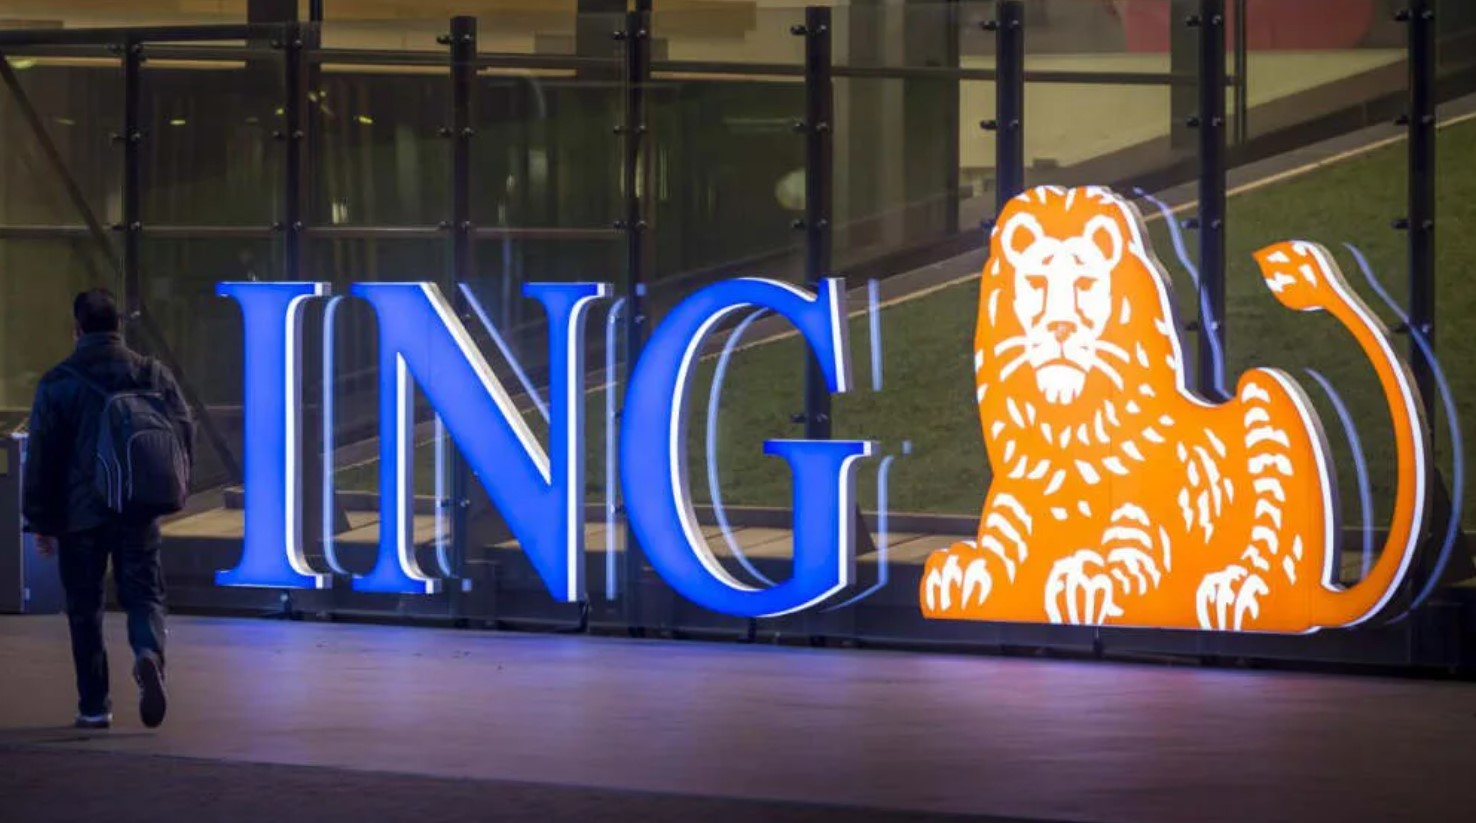 Ing Customer Service, Phone Number, Contact And Support Email